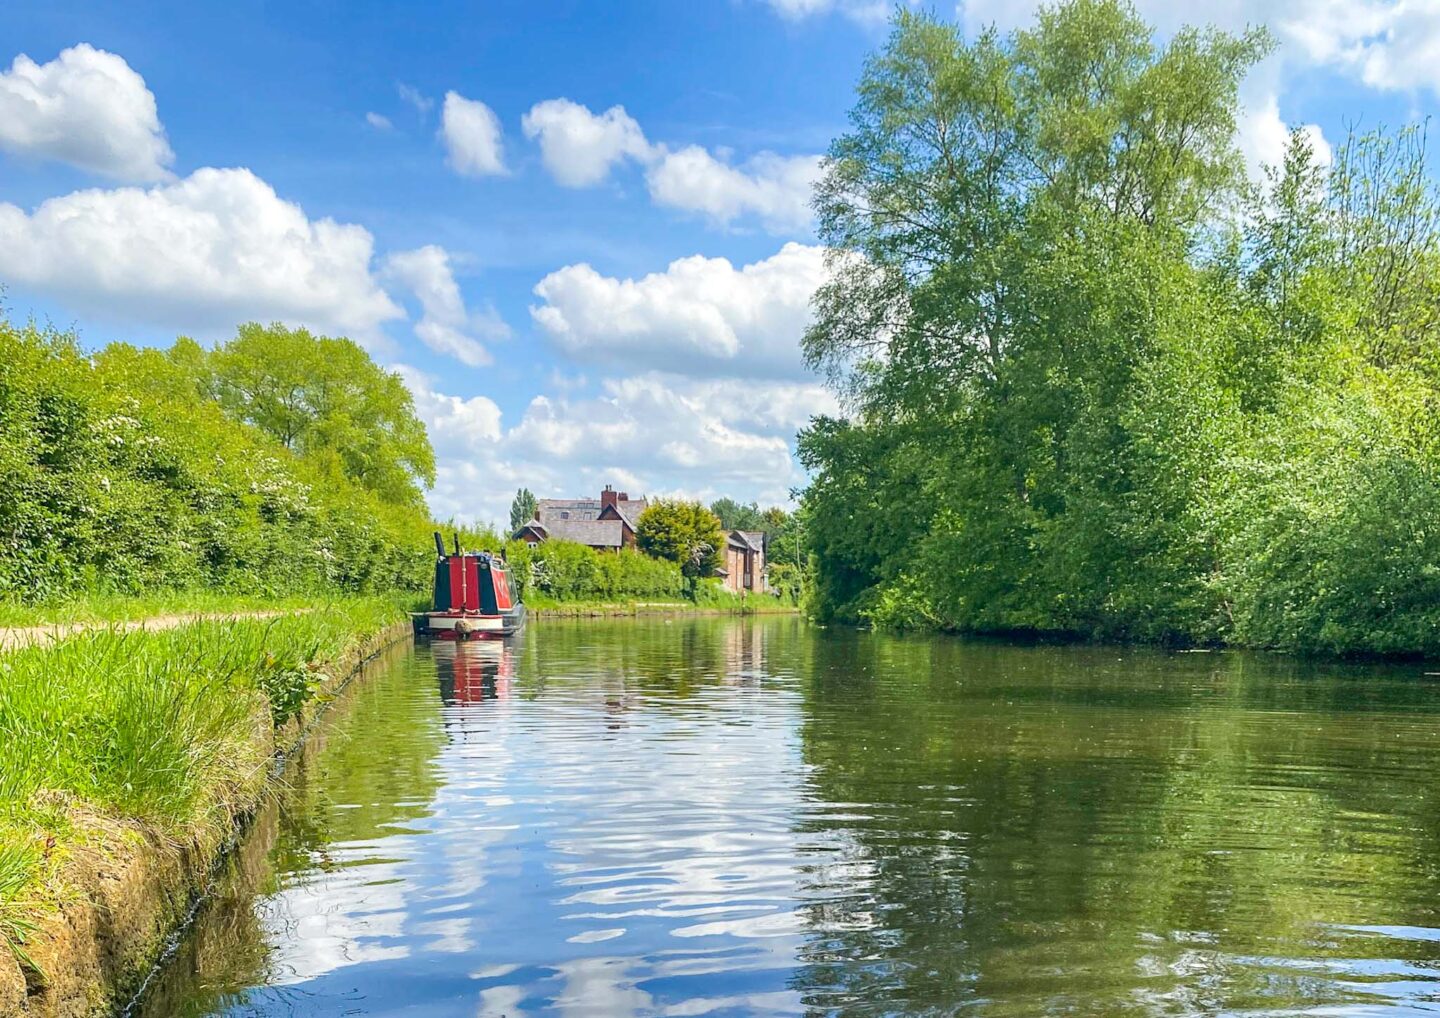 Things to do in Altrincham, Altrincham Canal and pathway with blue sky